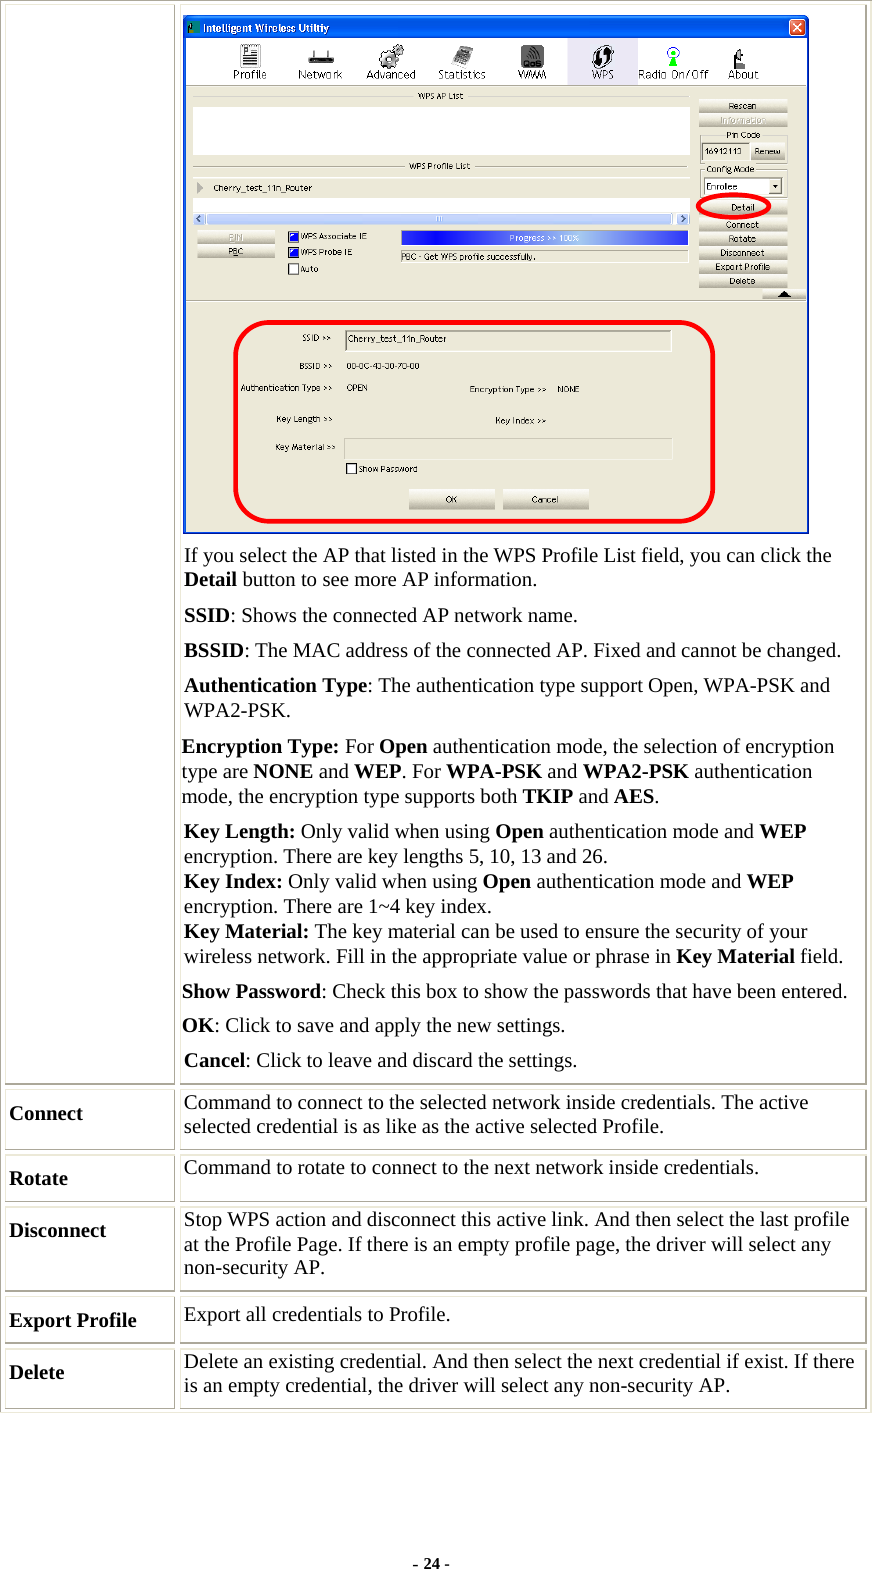   If you select the AP that listed in the WPS Profile List field, you can click the Detail button to see more AP information. SSID: Shows the connected AP network name. BSSID: The MAC address of the connected AP. Fixed and cannot be changed. Authentication Type: The authentication type support Open, WPA-PSK and WPA2-PSK.  Encryption Type: For Open authentication mode, the selection of encryption type are NONE and WEP. For WPA-PSK and WPA2-PSK authentication mode, the encryption type supports both TKIP and AES. Key Length: Only valid when using Open authentication mode and WEP encryption. There are key lengths 5, 10, 13 and 26. Key Index: Only valid when using Open authentication mode and WEP encryption. There are 1~4 key index. Key Material: The key material can be used to ensure the security of your wireless network. Fill in the appropriate value or phrase in Key Material field. Show Password: Check this box to show the passwords that have been entered. OK: Click to save and apply the new settings. Cancel: Click to leave and discard the settings. Connect  Command to connect to the selected network inside credentials. The active selected credential is as like as the active selected Profile. Rotate  Command to rotate to connect to the next network inside credentials. Disconnect  Stop WPS action and disconnect this active link. And then select the last profile at the Profile Page. If there is an empty profile page, the driver will select any non-security AP. Export Profile  Export all credentials to Profile. Delete  Delete an existing credential. And then select the next credential if exist. If there is an empty credential, the driver will select any non-security AP. - 24 - 